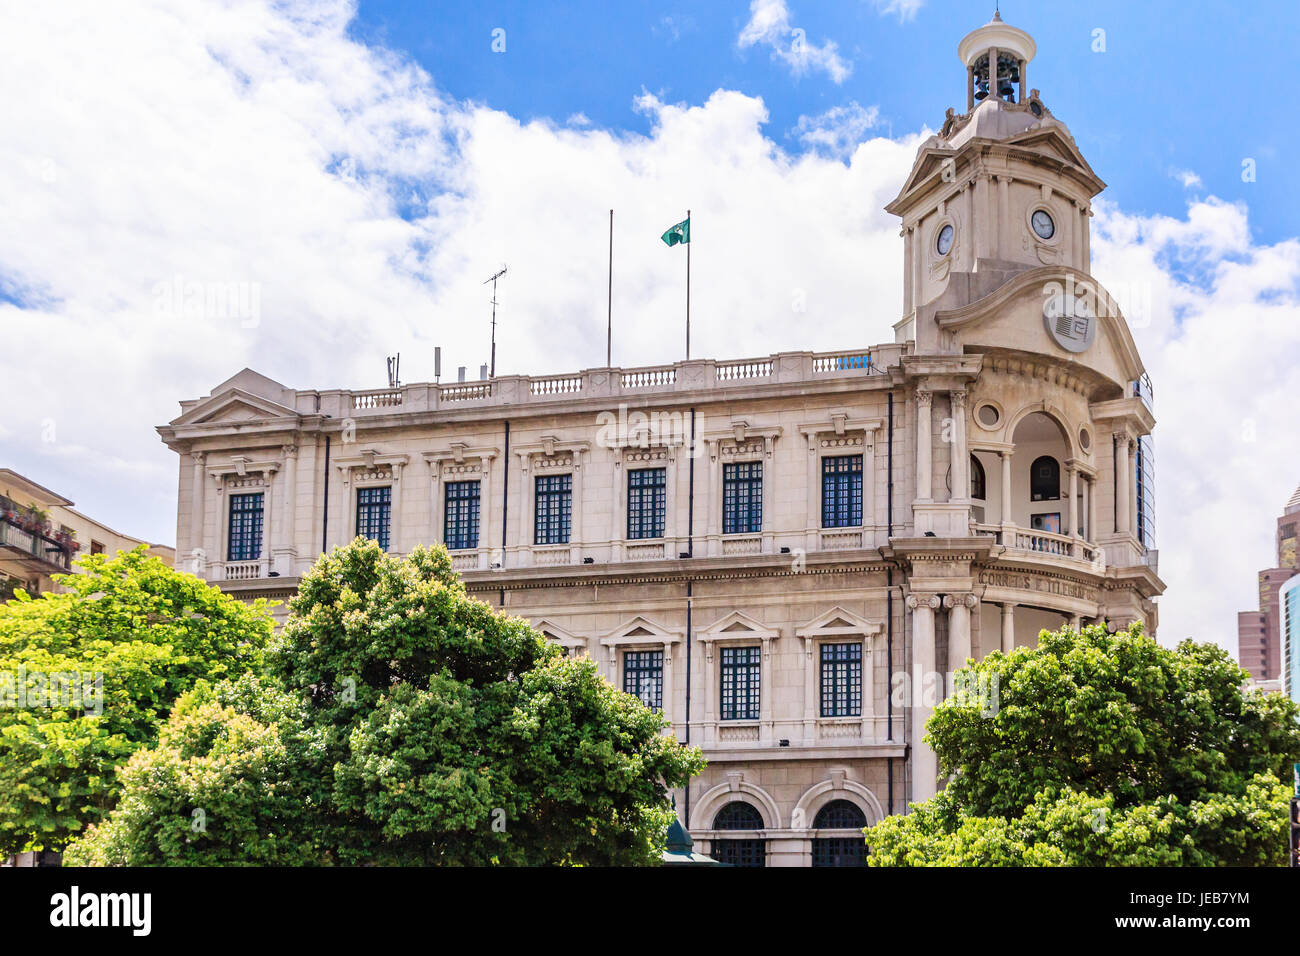 MACAU, CHINA - JULY 22, 2013: General Post Office, Macau. The Historic Centre of Macao was inscribed on the UNESCO World Heritage List in 2005. Stock Photo